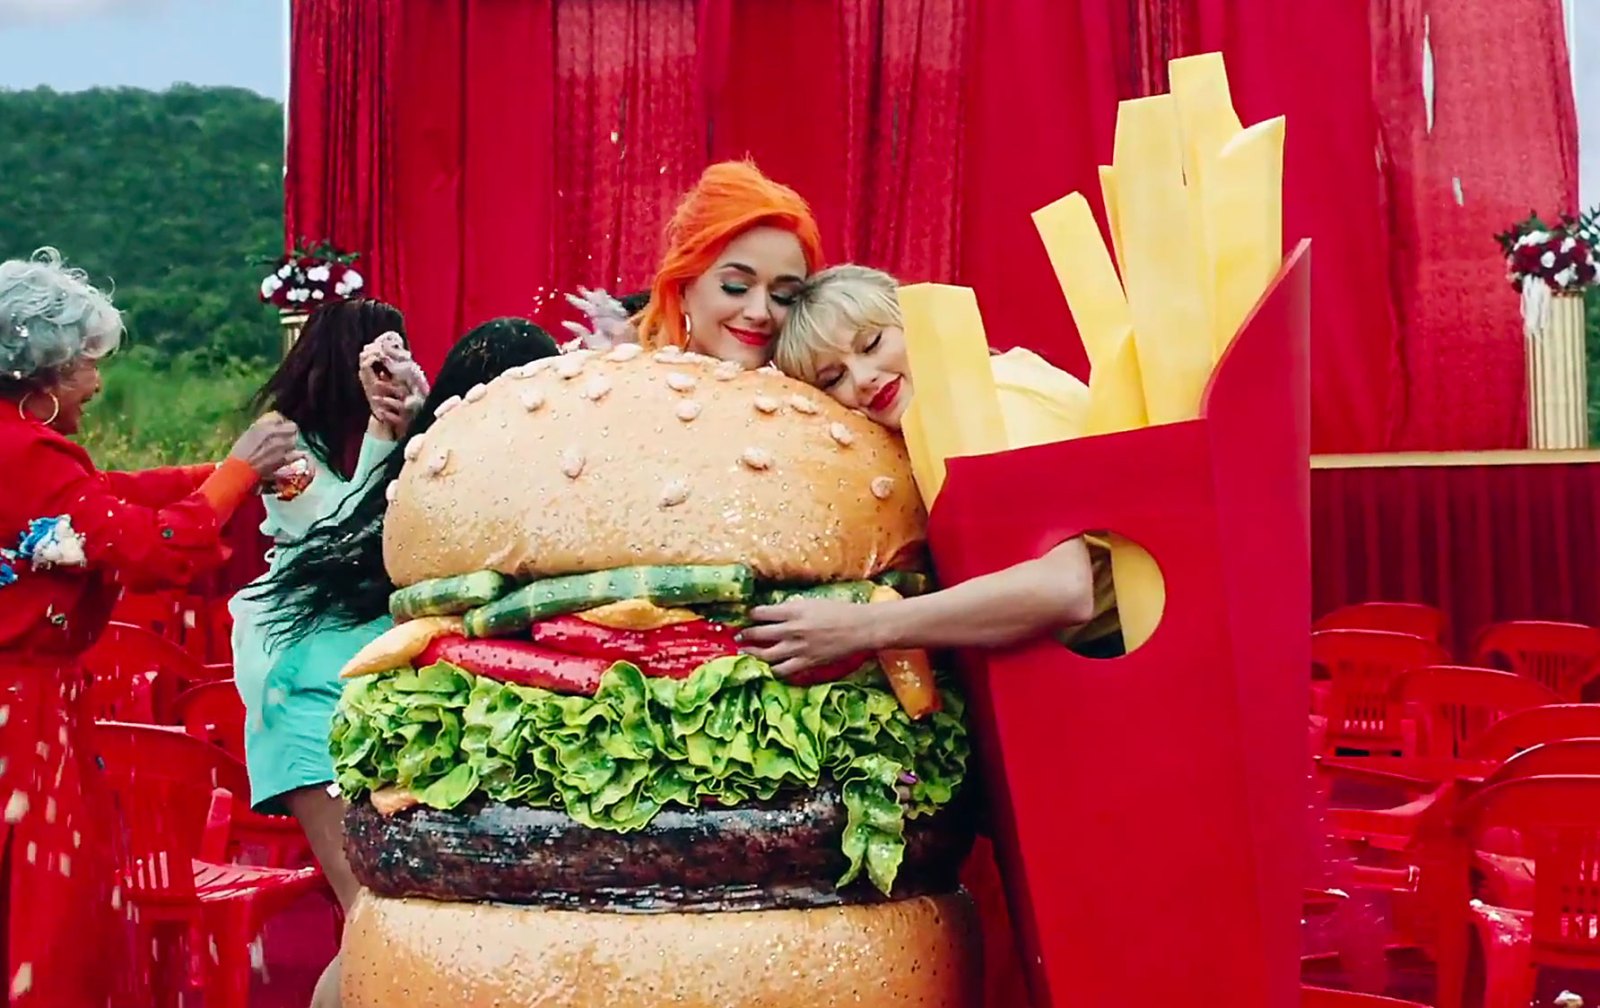 Stars Who Have Called Truces With Food Taylor Swift and Katy Perry